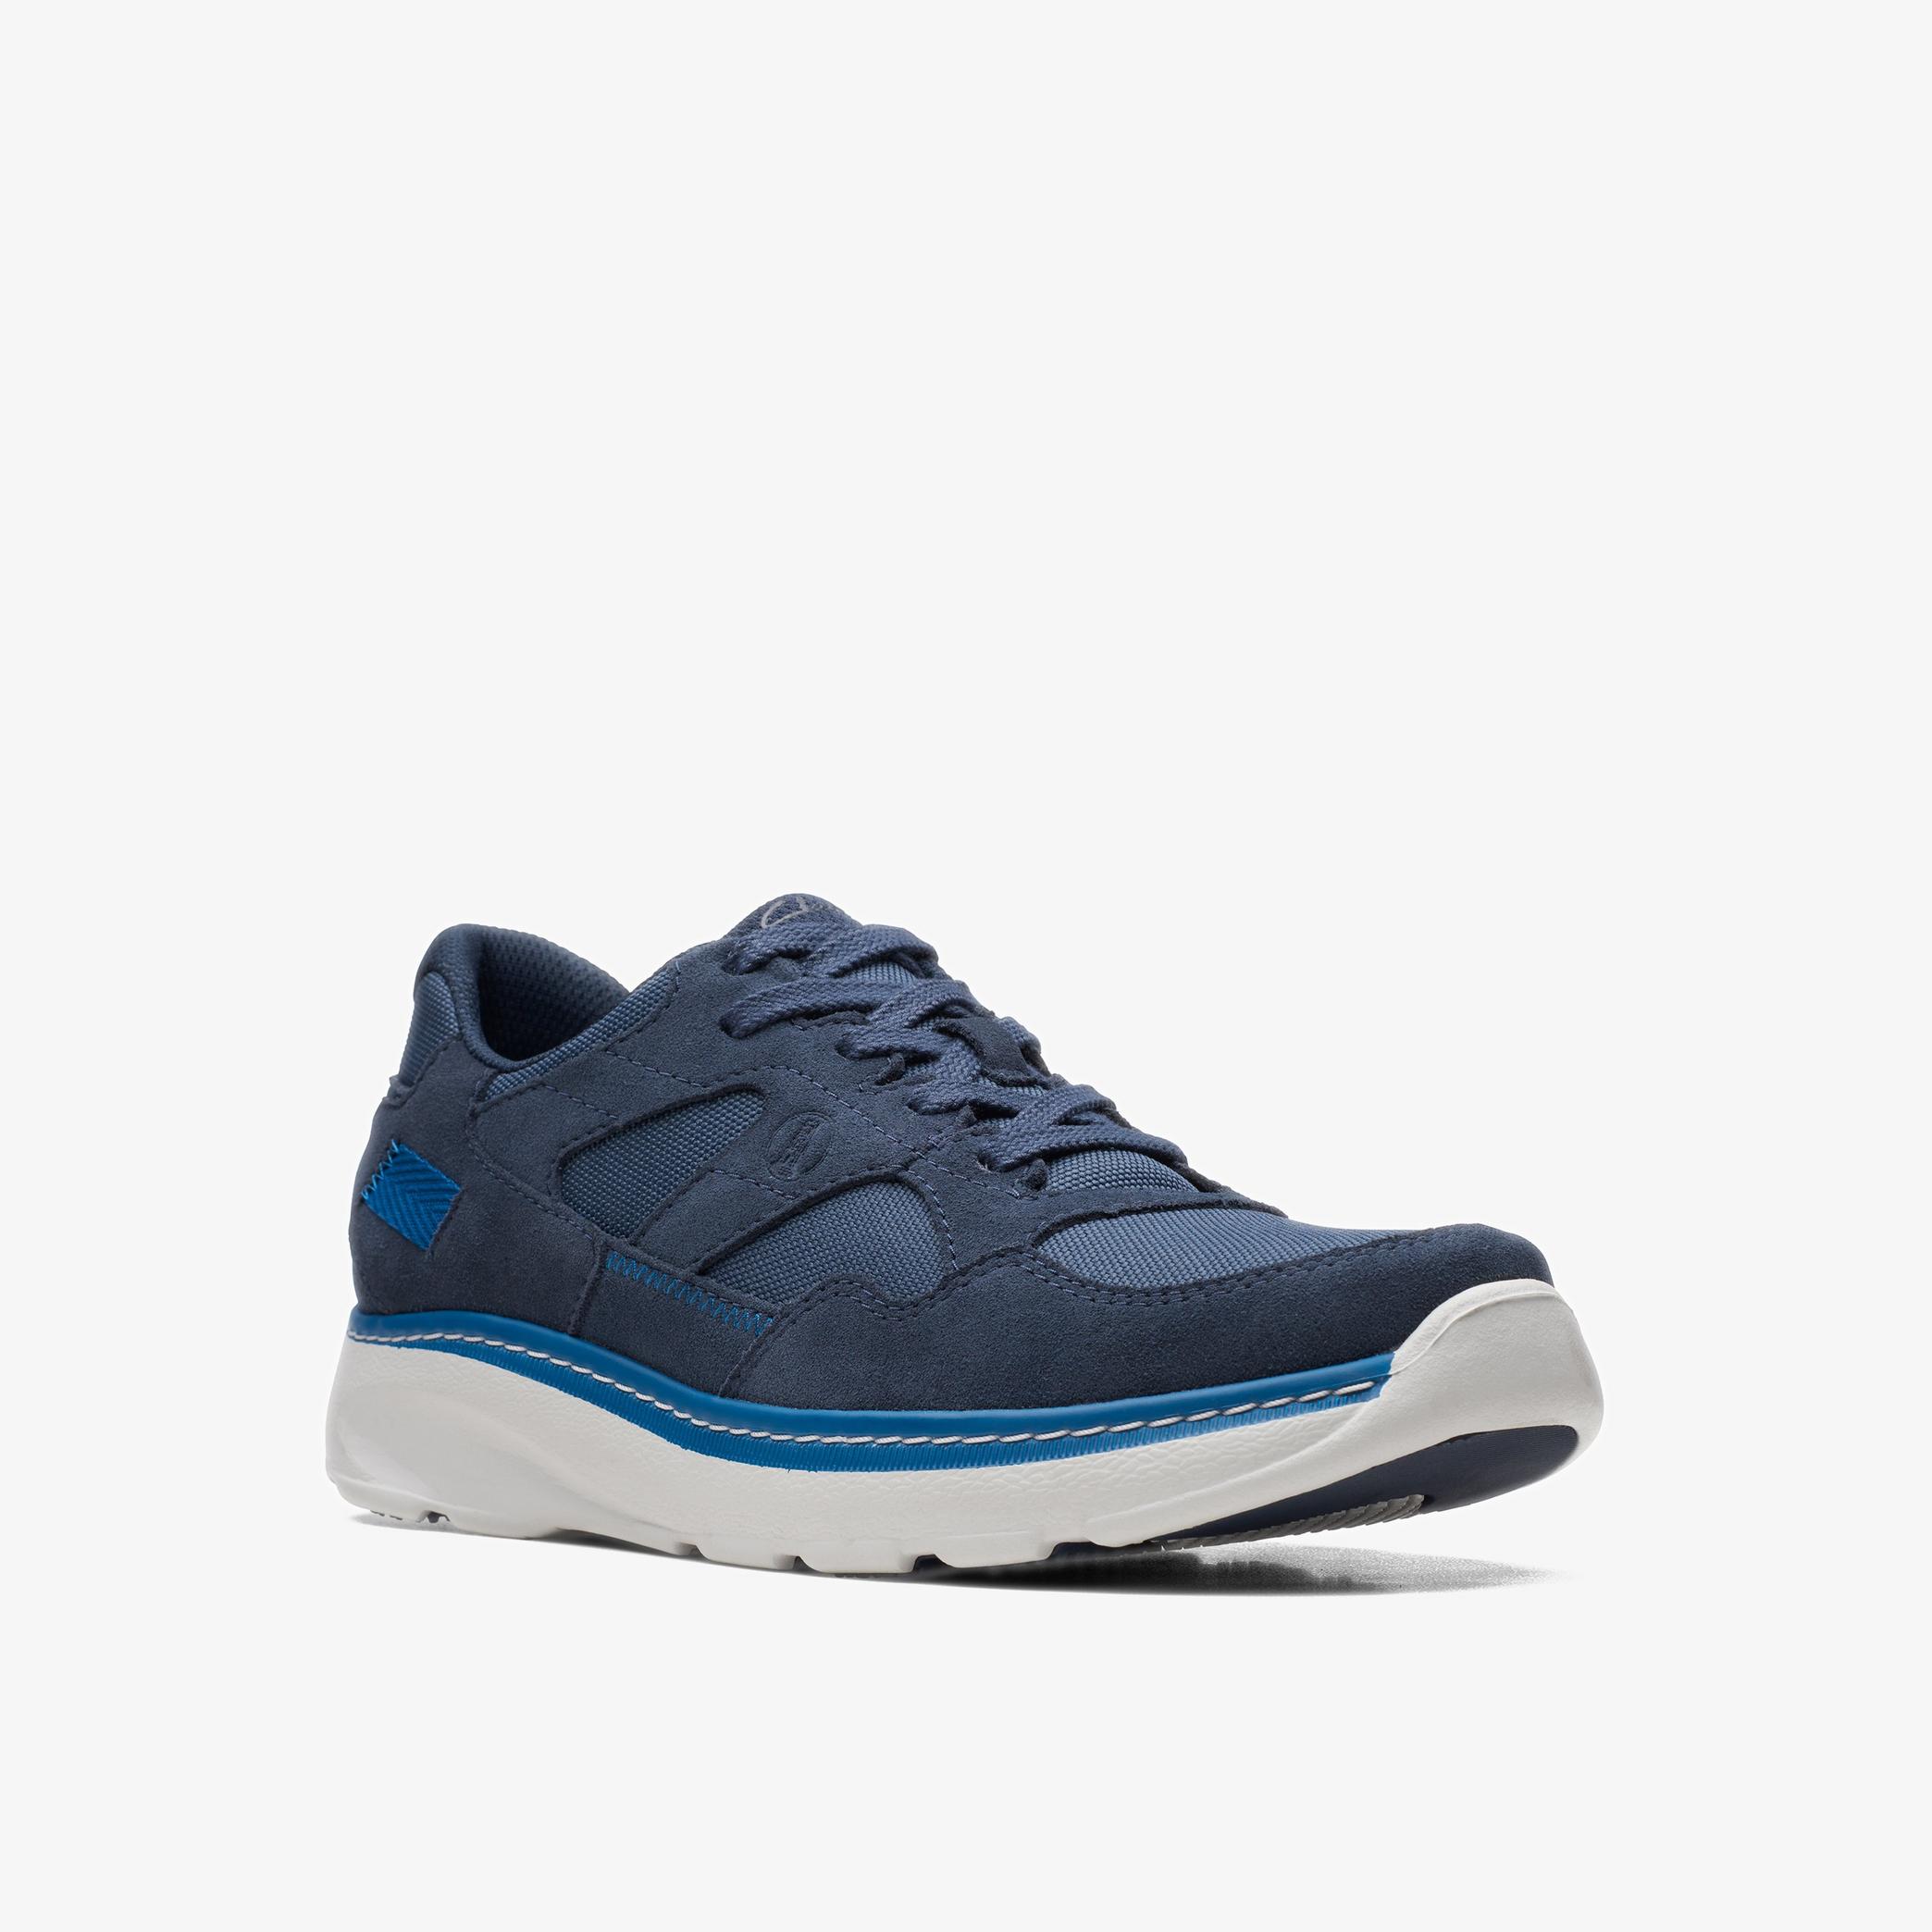 MENS Chart Lite Tor Navy Combination Shoes | Clarks Outlet